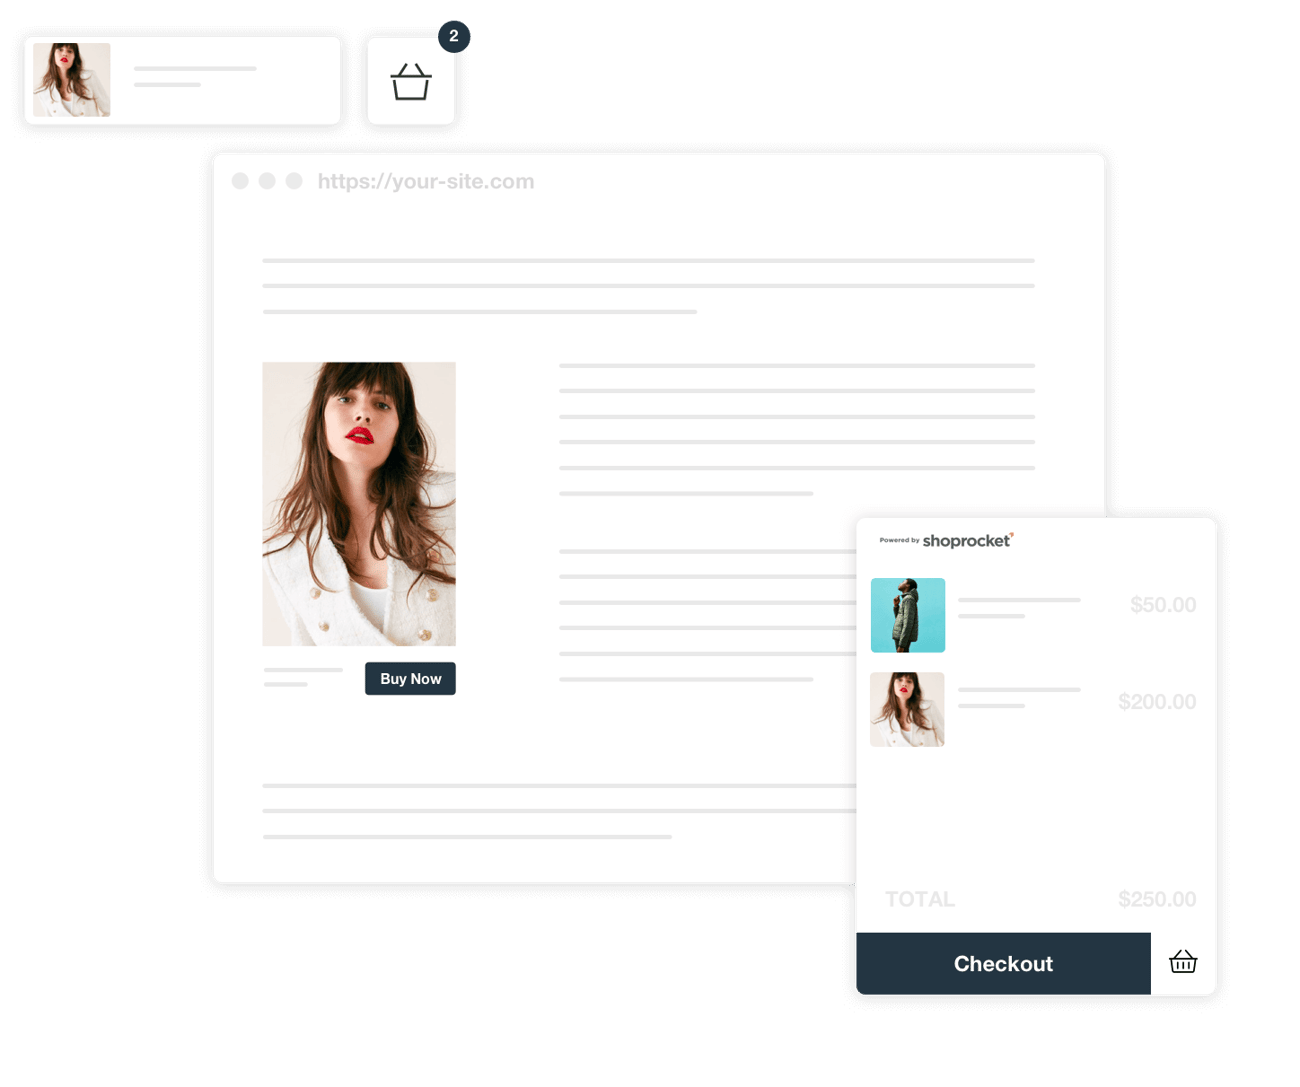 Add ecommerce to your existing website in minutes